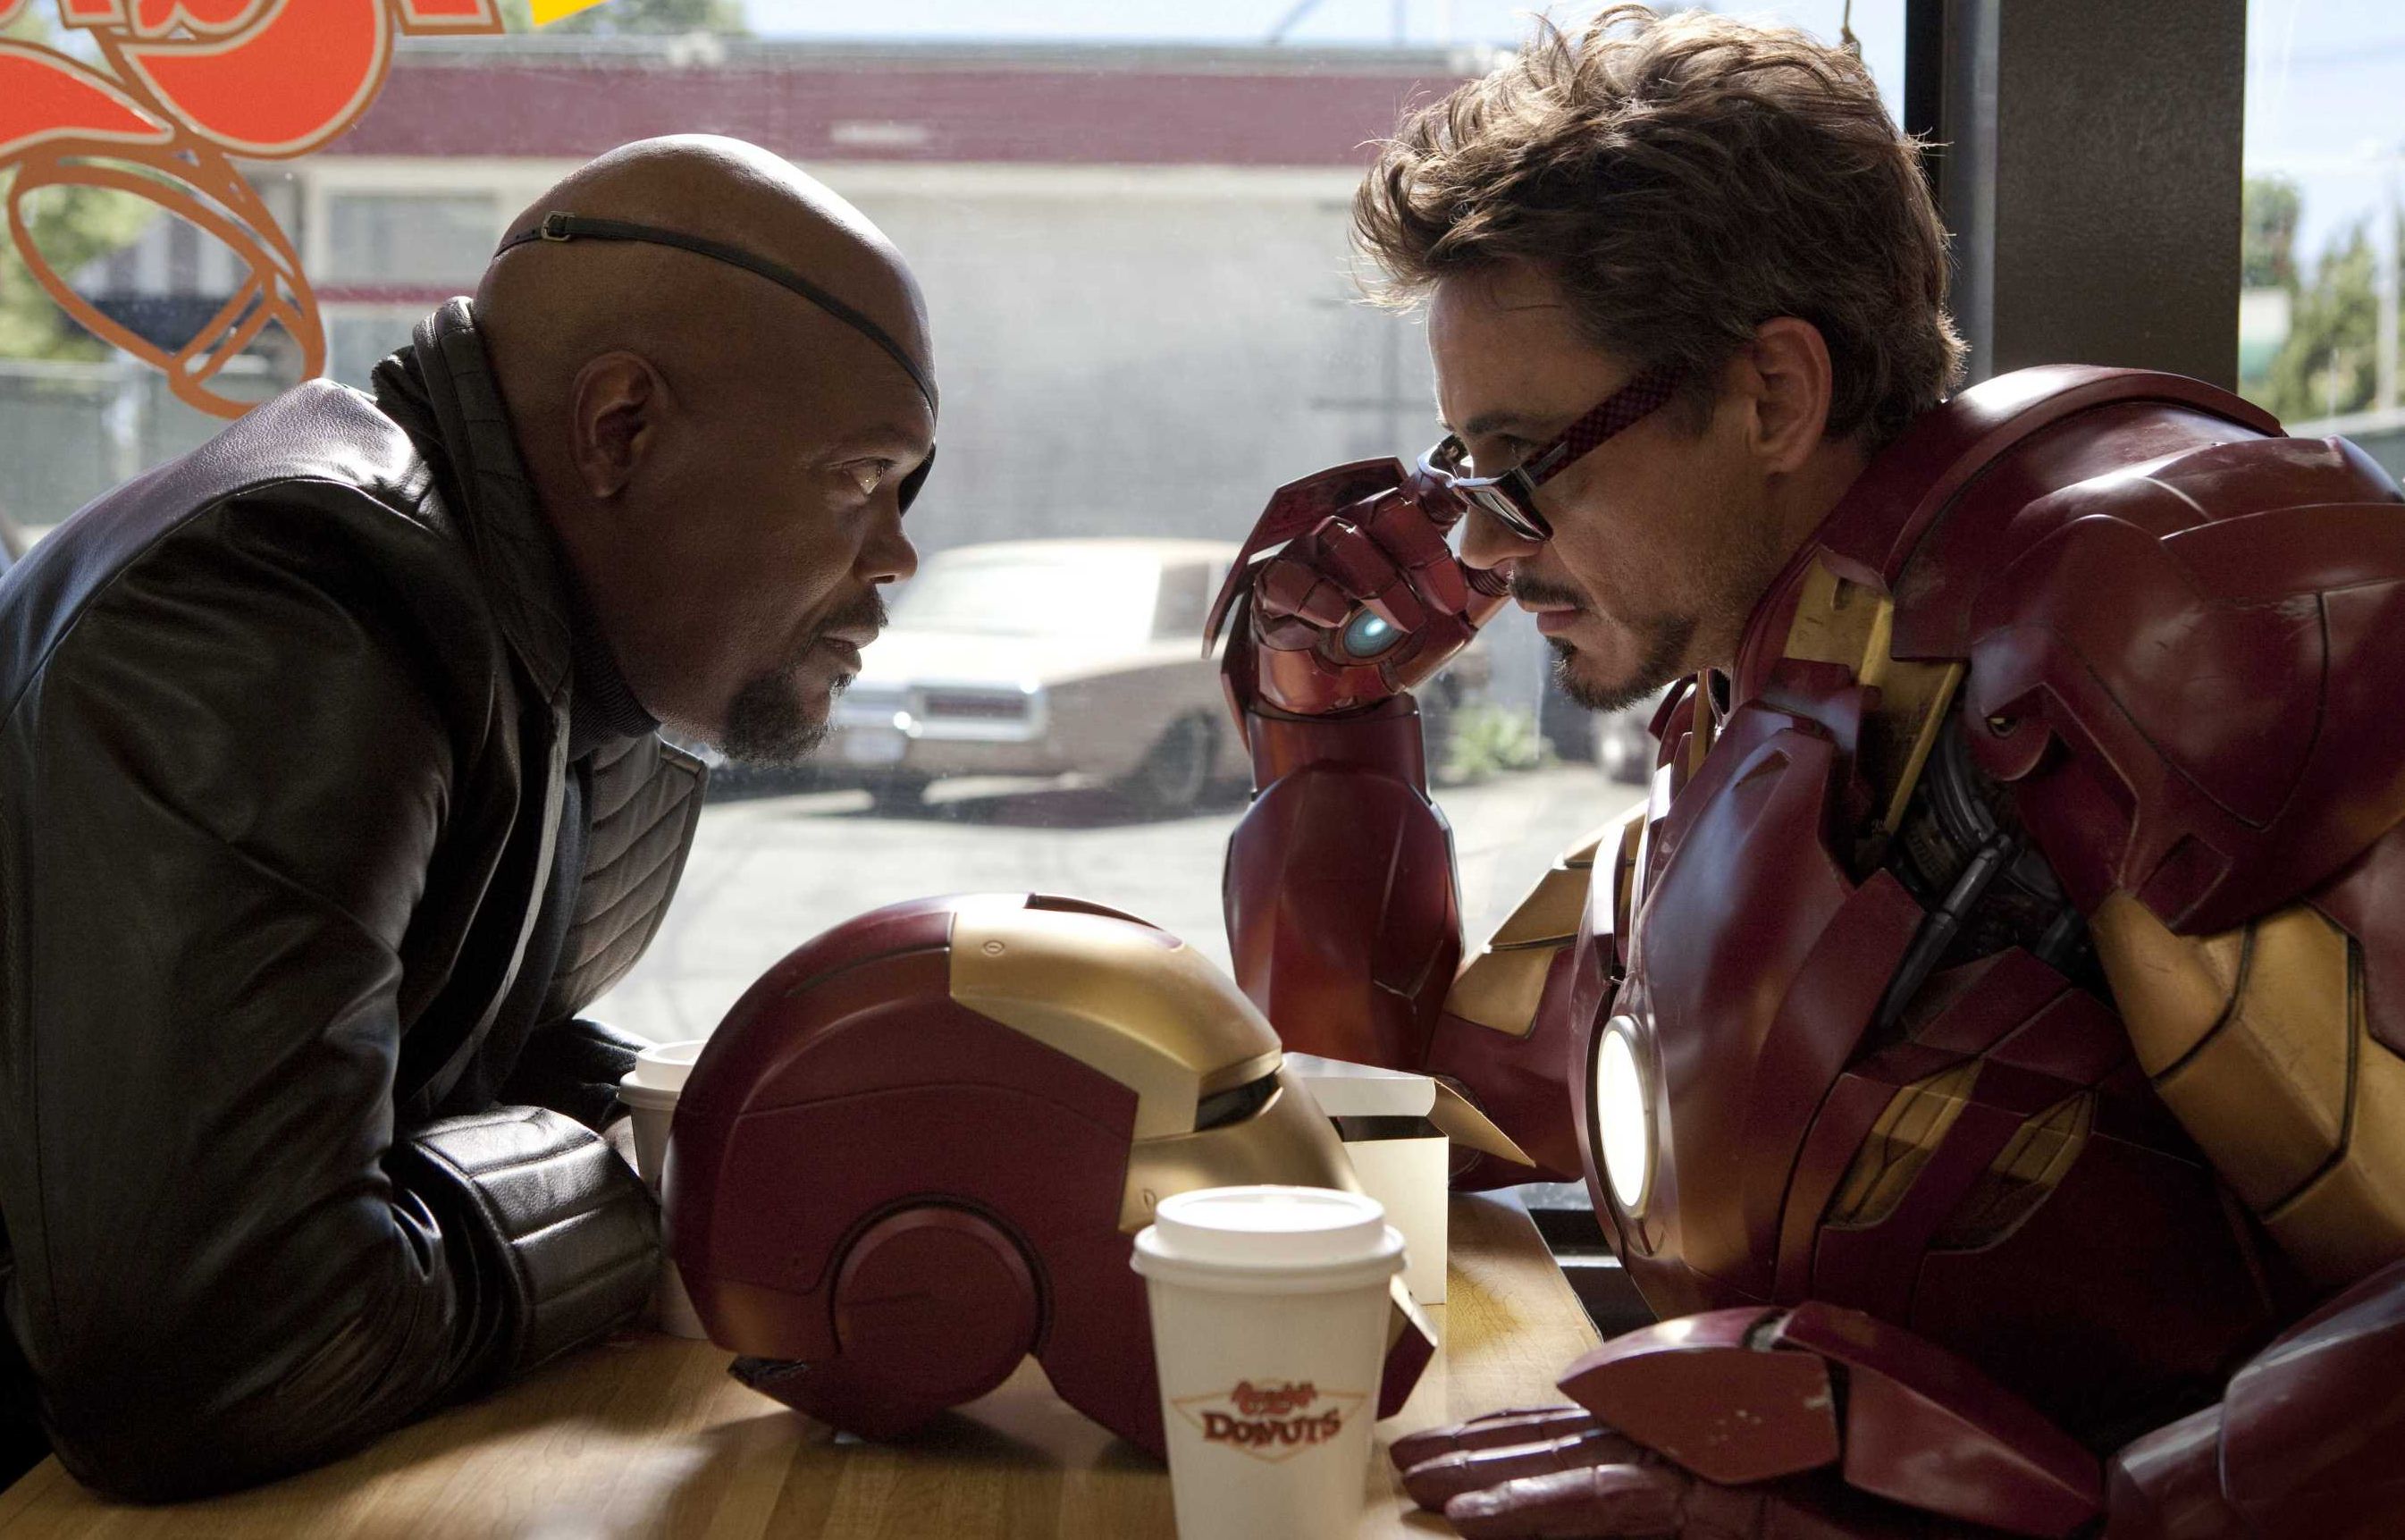 Nick Fury and Iron Man have a little chat over some coffee